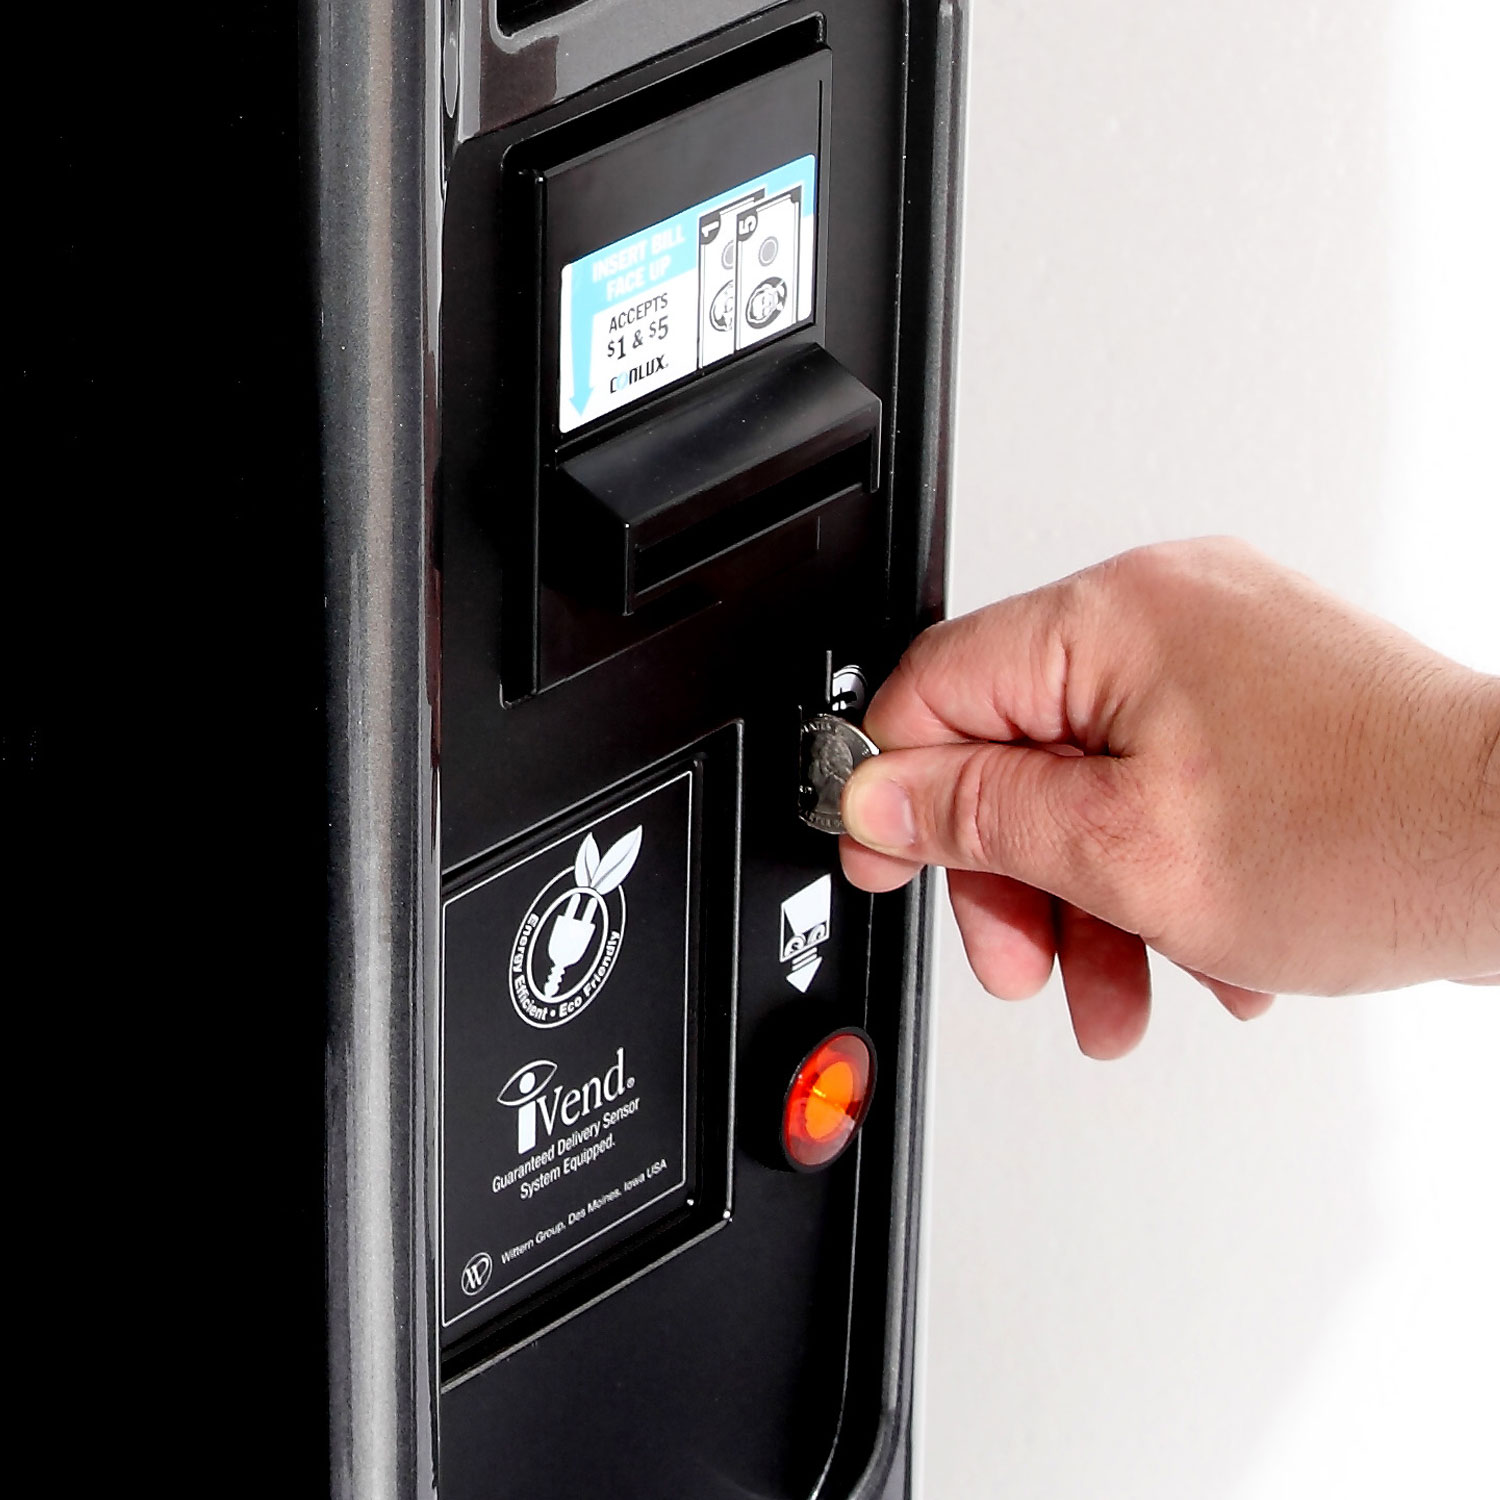 A customer paying for their product using a coin through the coin acceptor on a vending machine.